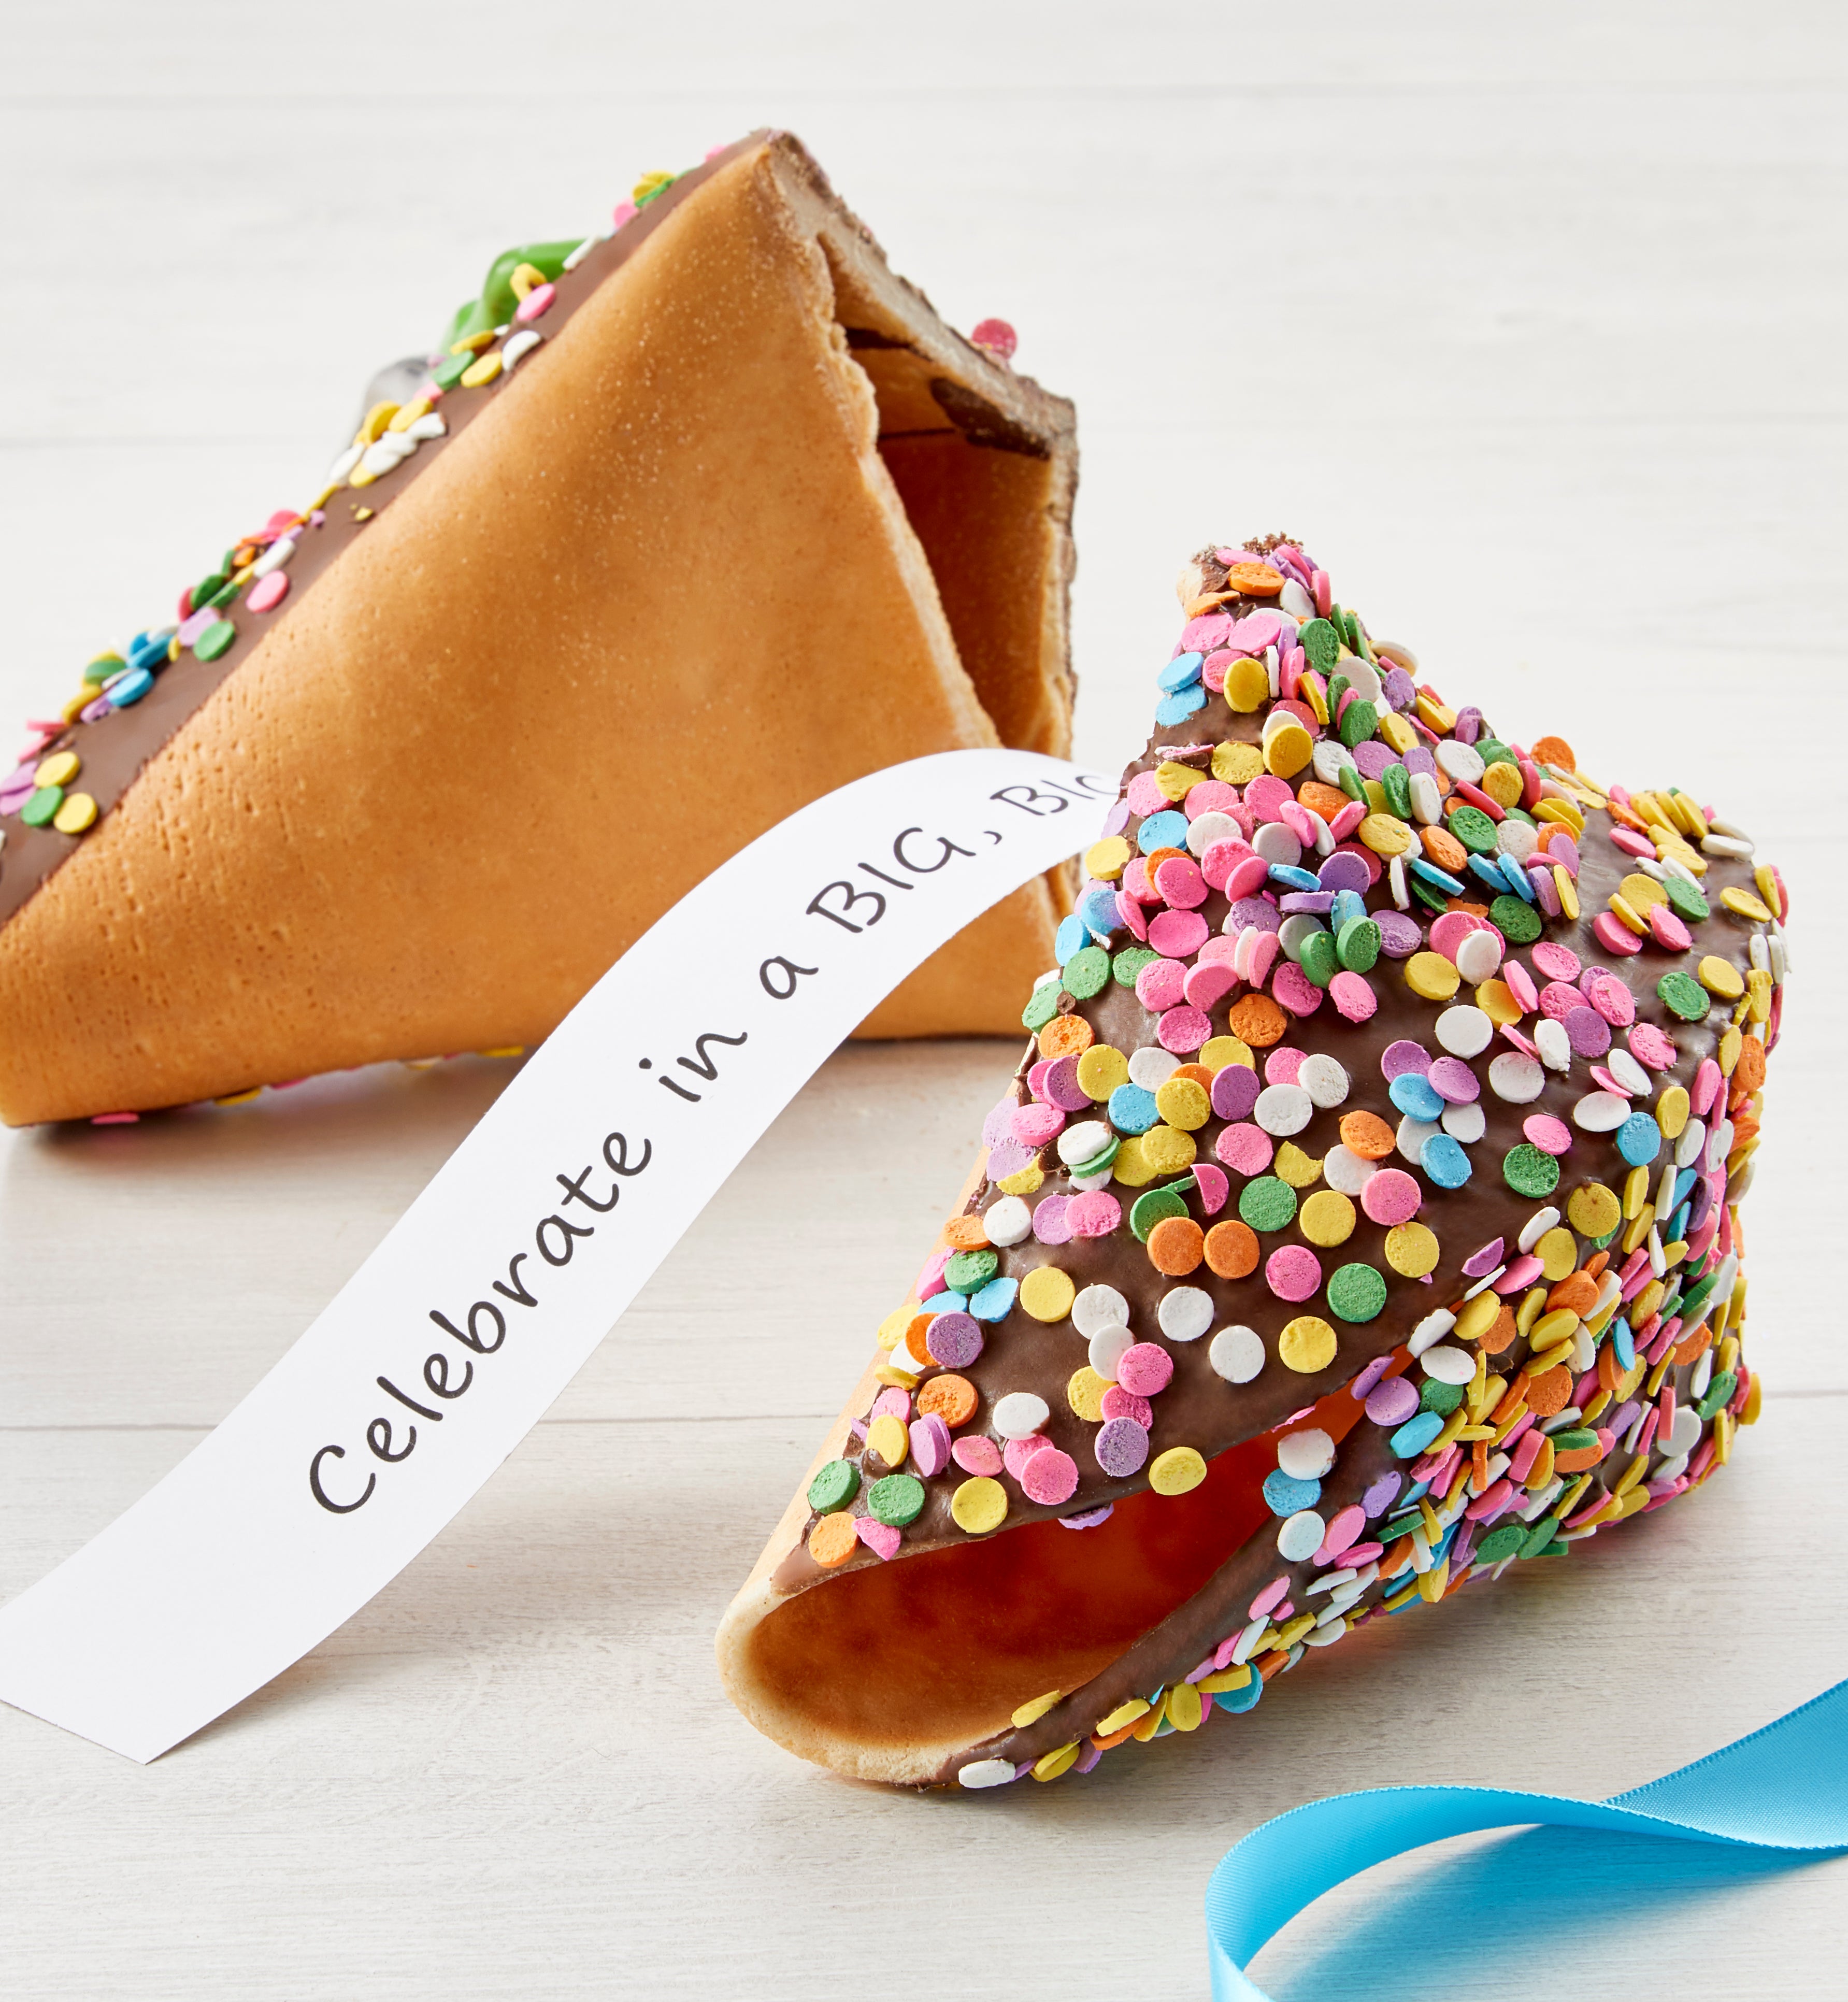 Personalized Gigantic Giant Confetti Fortune Cookie